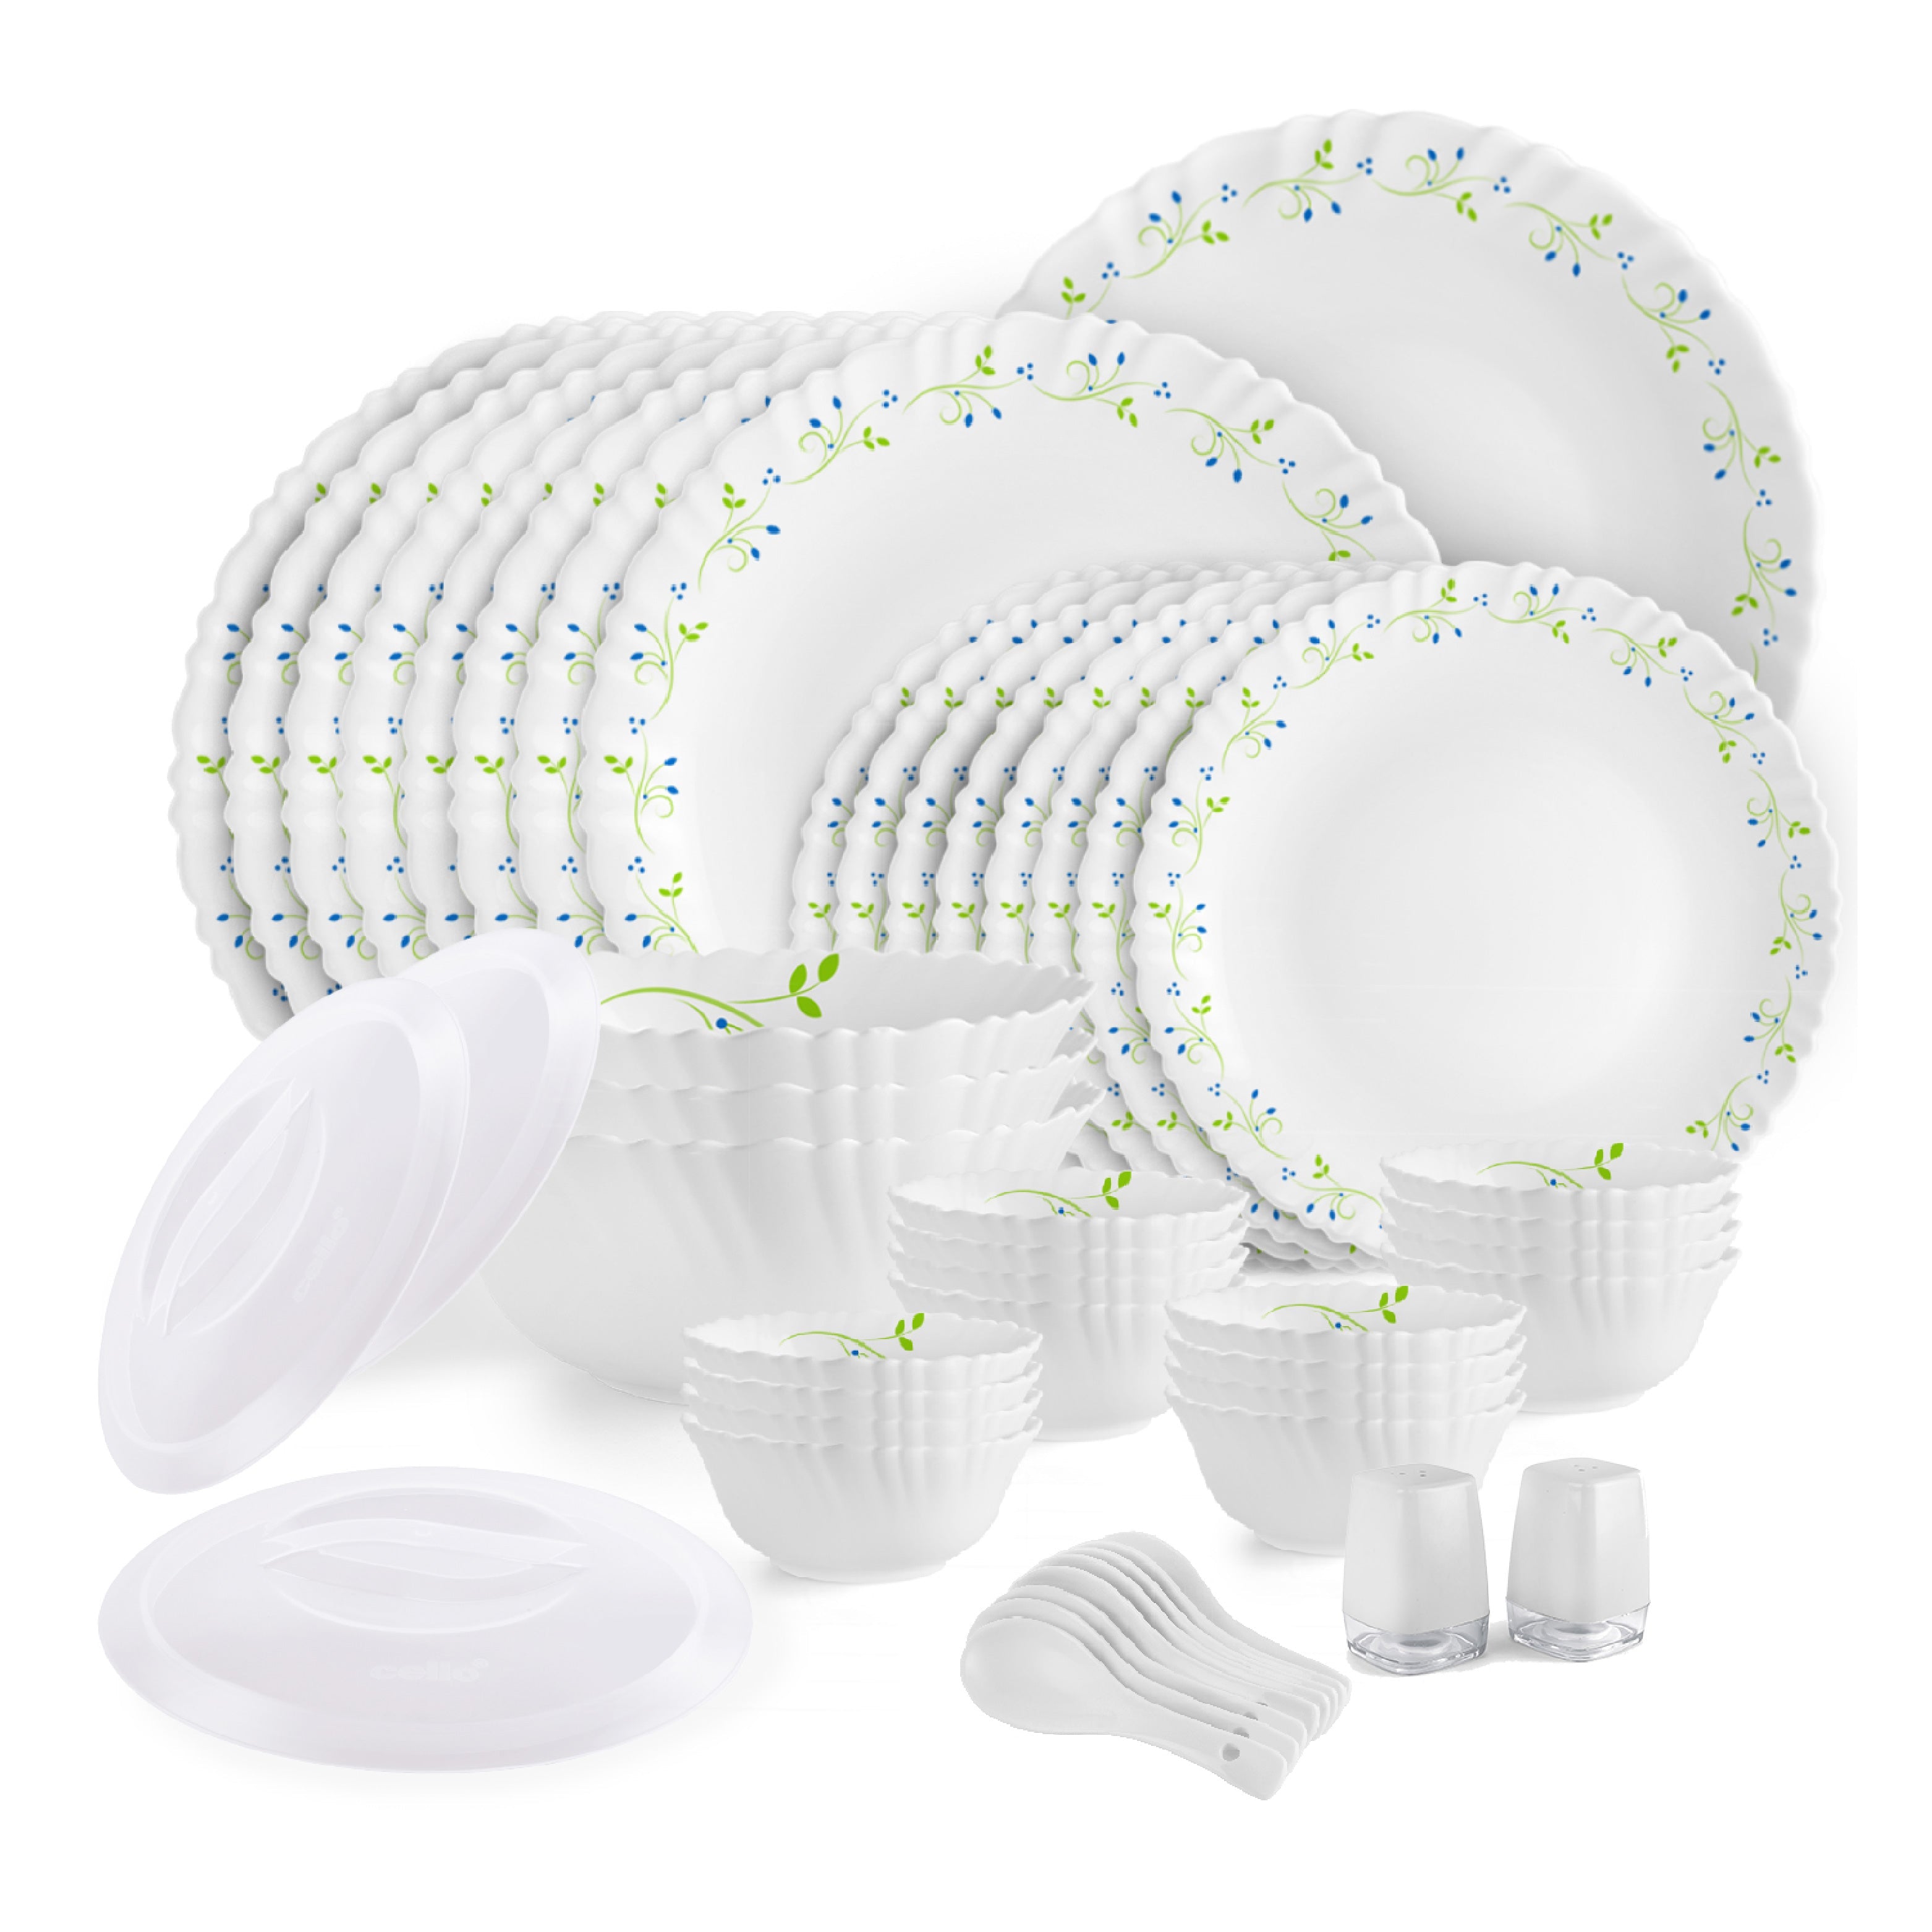 Vibrant 49-piece opalware dinner set, adorned with floral motifs. Includes plates, bowls, and serveware for elegant dining